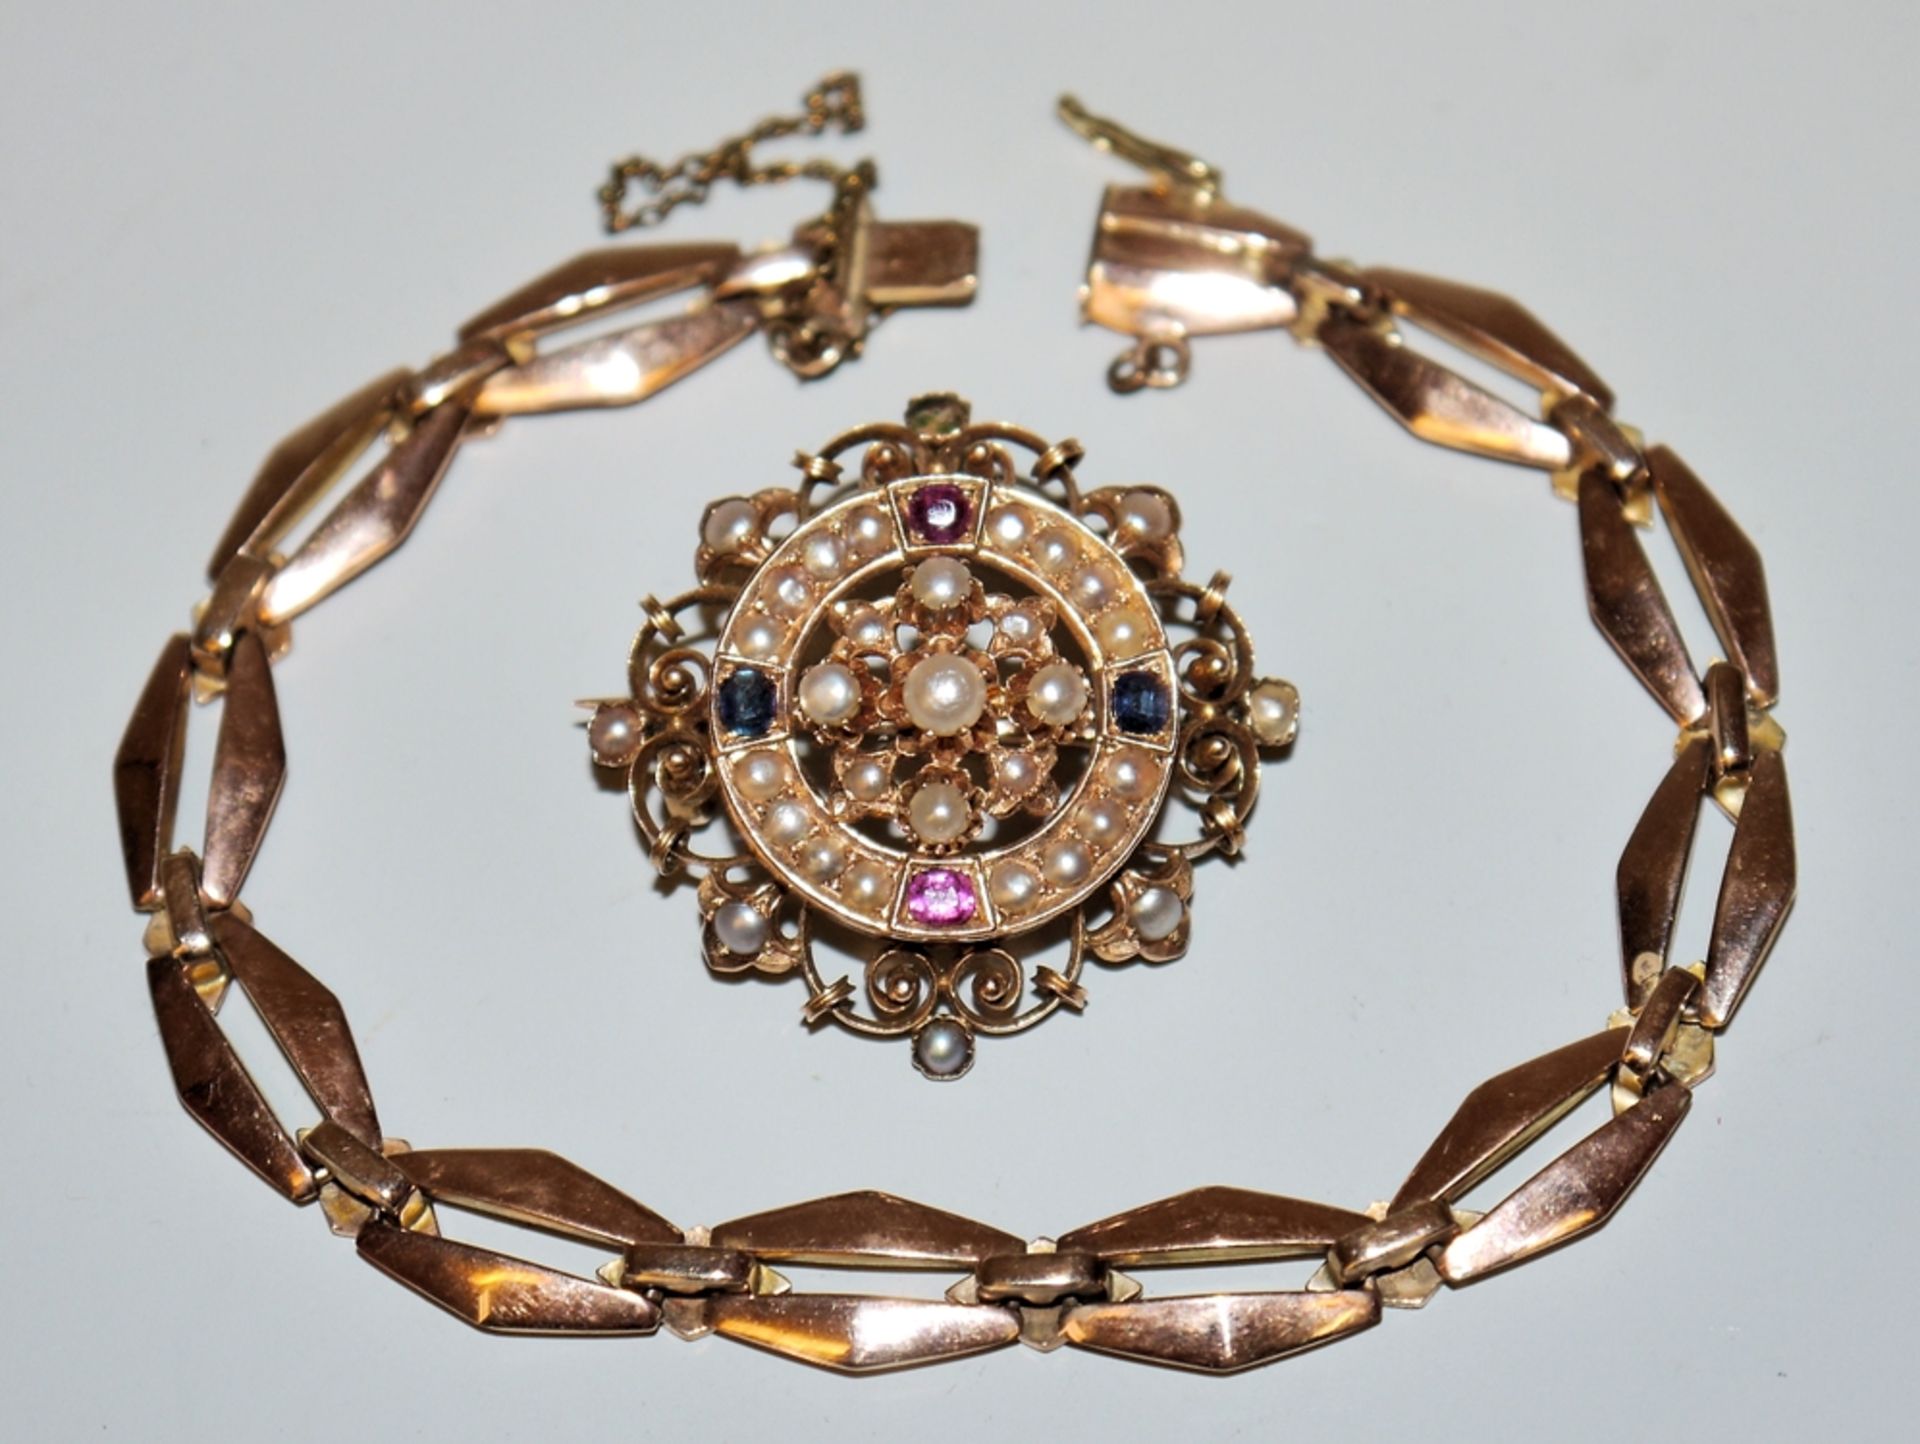 Brooch with South Sea pearls and coloured stones, gold, & bracelet, gold